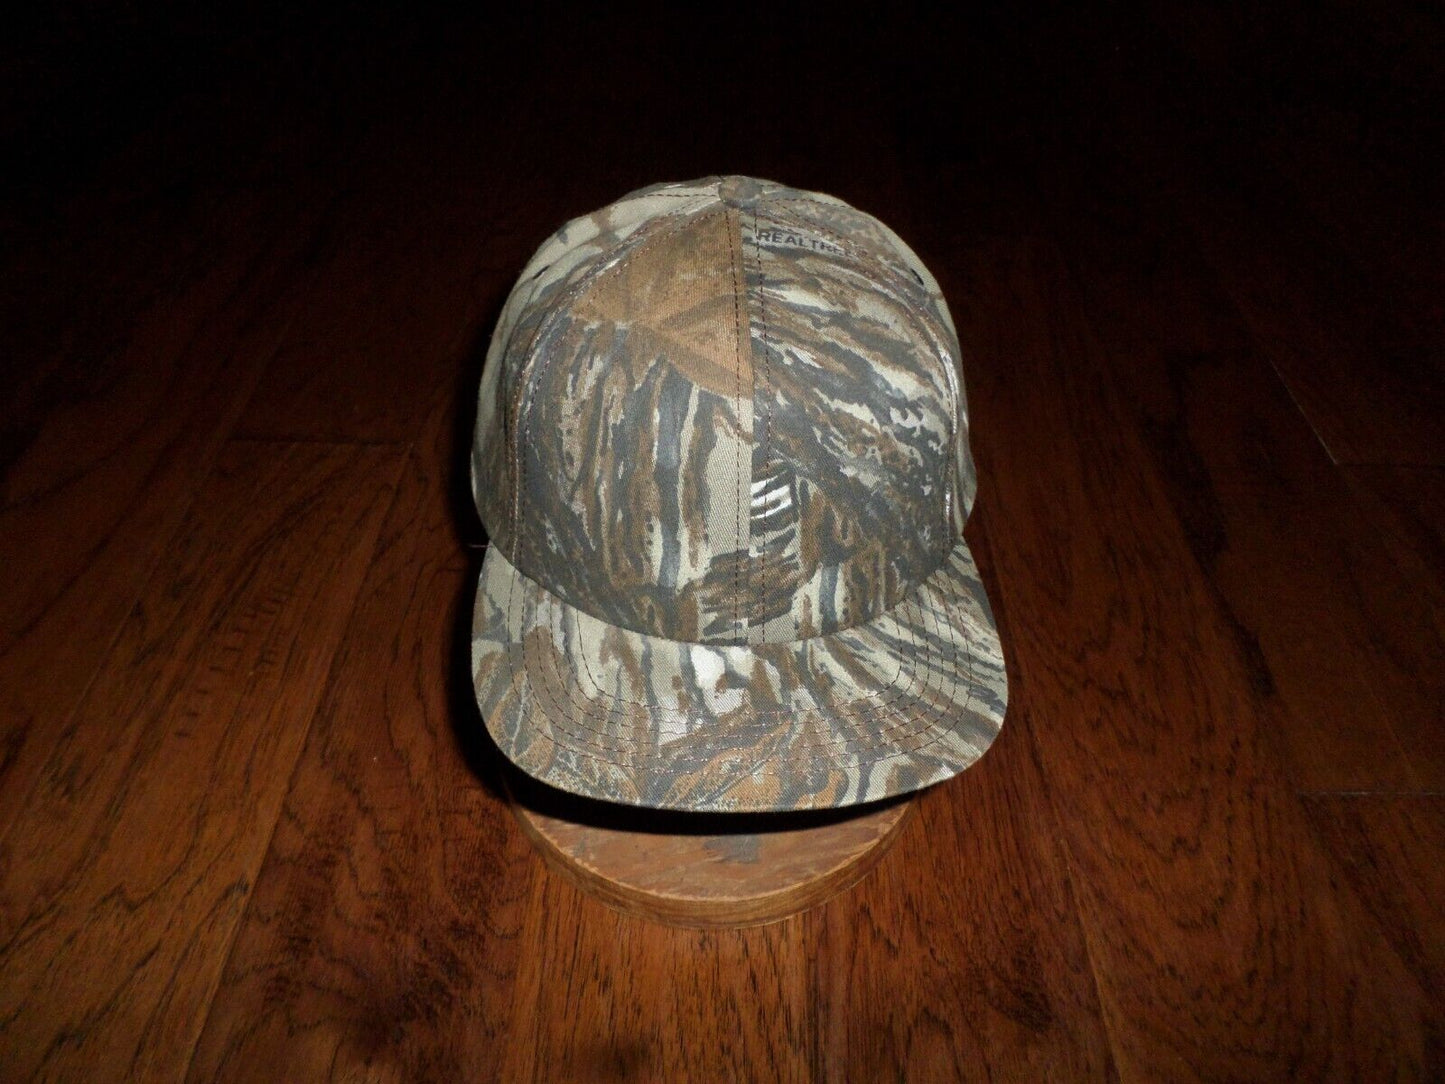 NEW REALTREE CAMOUFLAGE HAT HUNTING BALL CAP ADJUSTABLE SNAPBACK